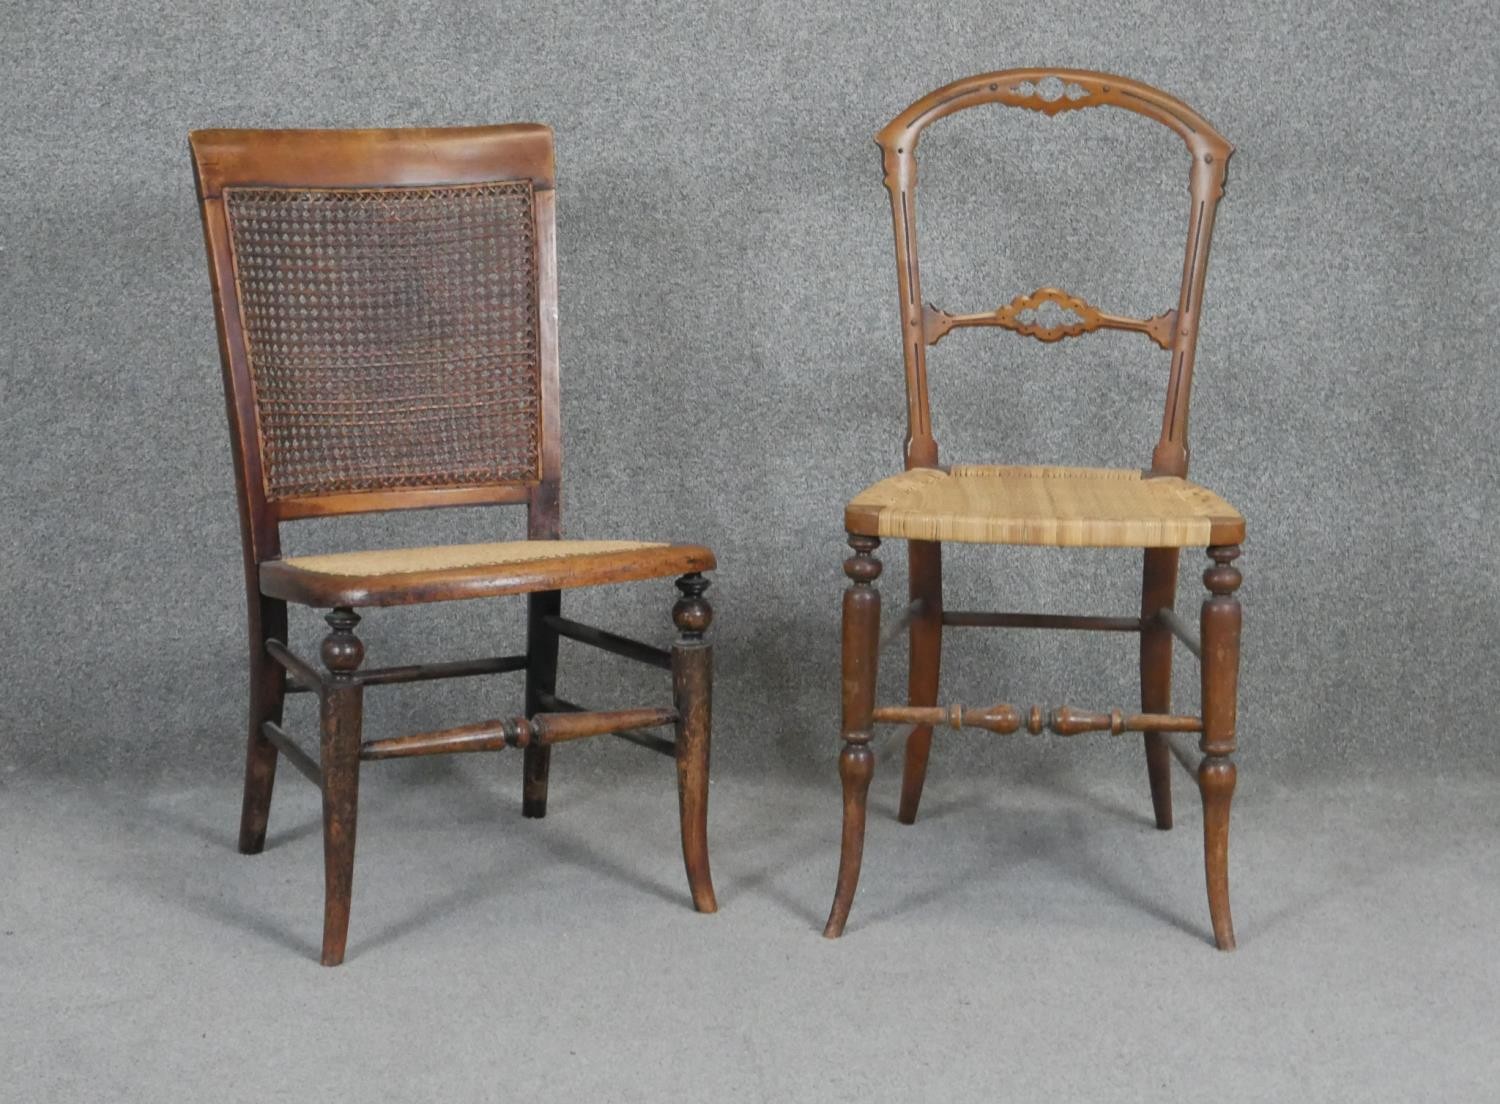 A 19th century walnut bedroom chair with woven seat and a similar caned seat beech chair.